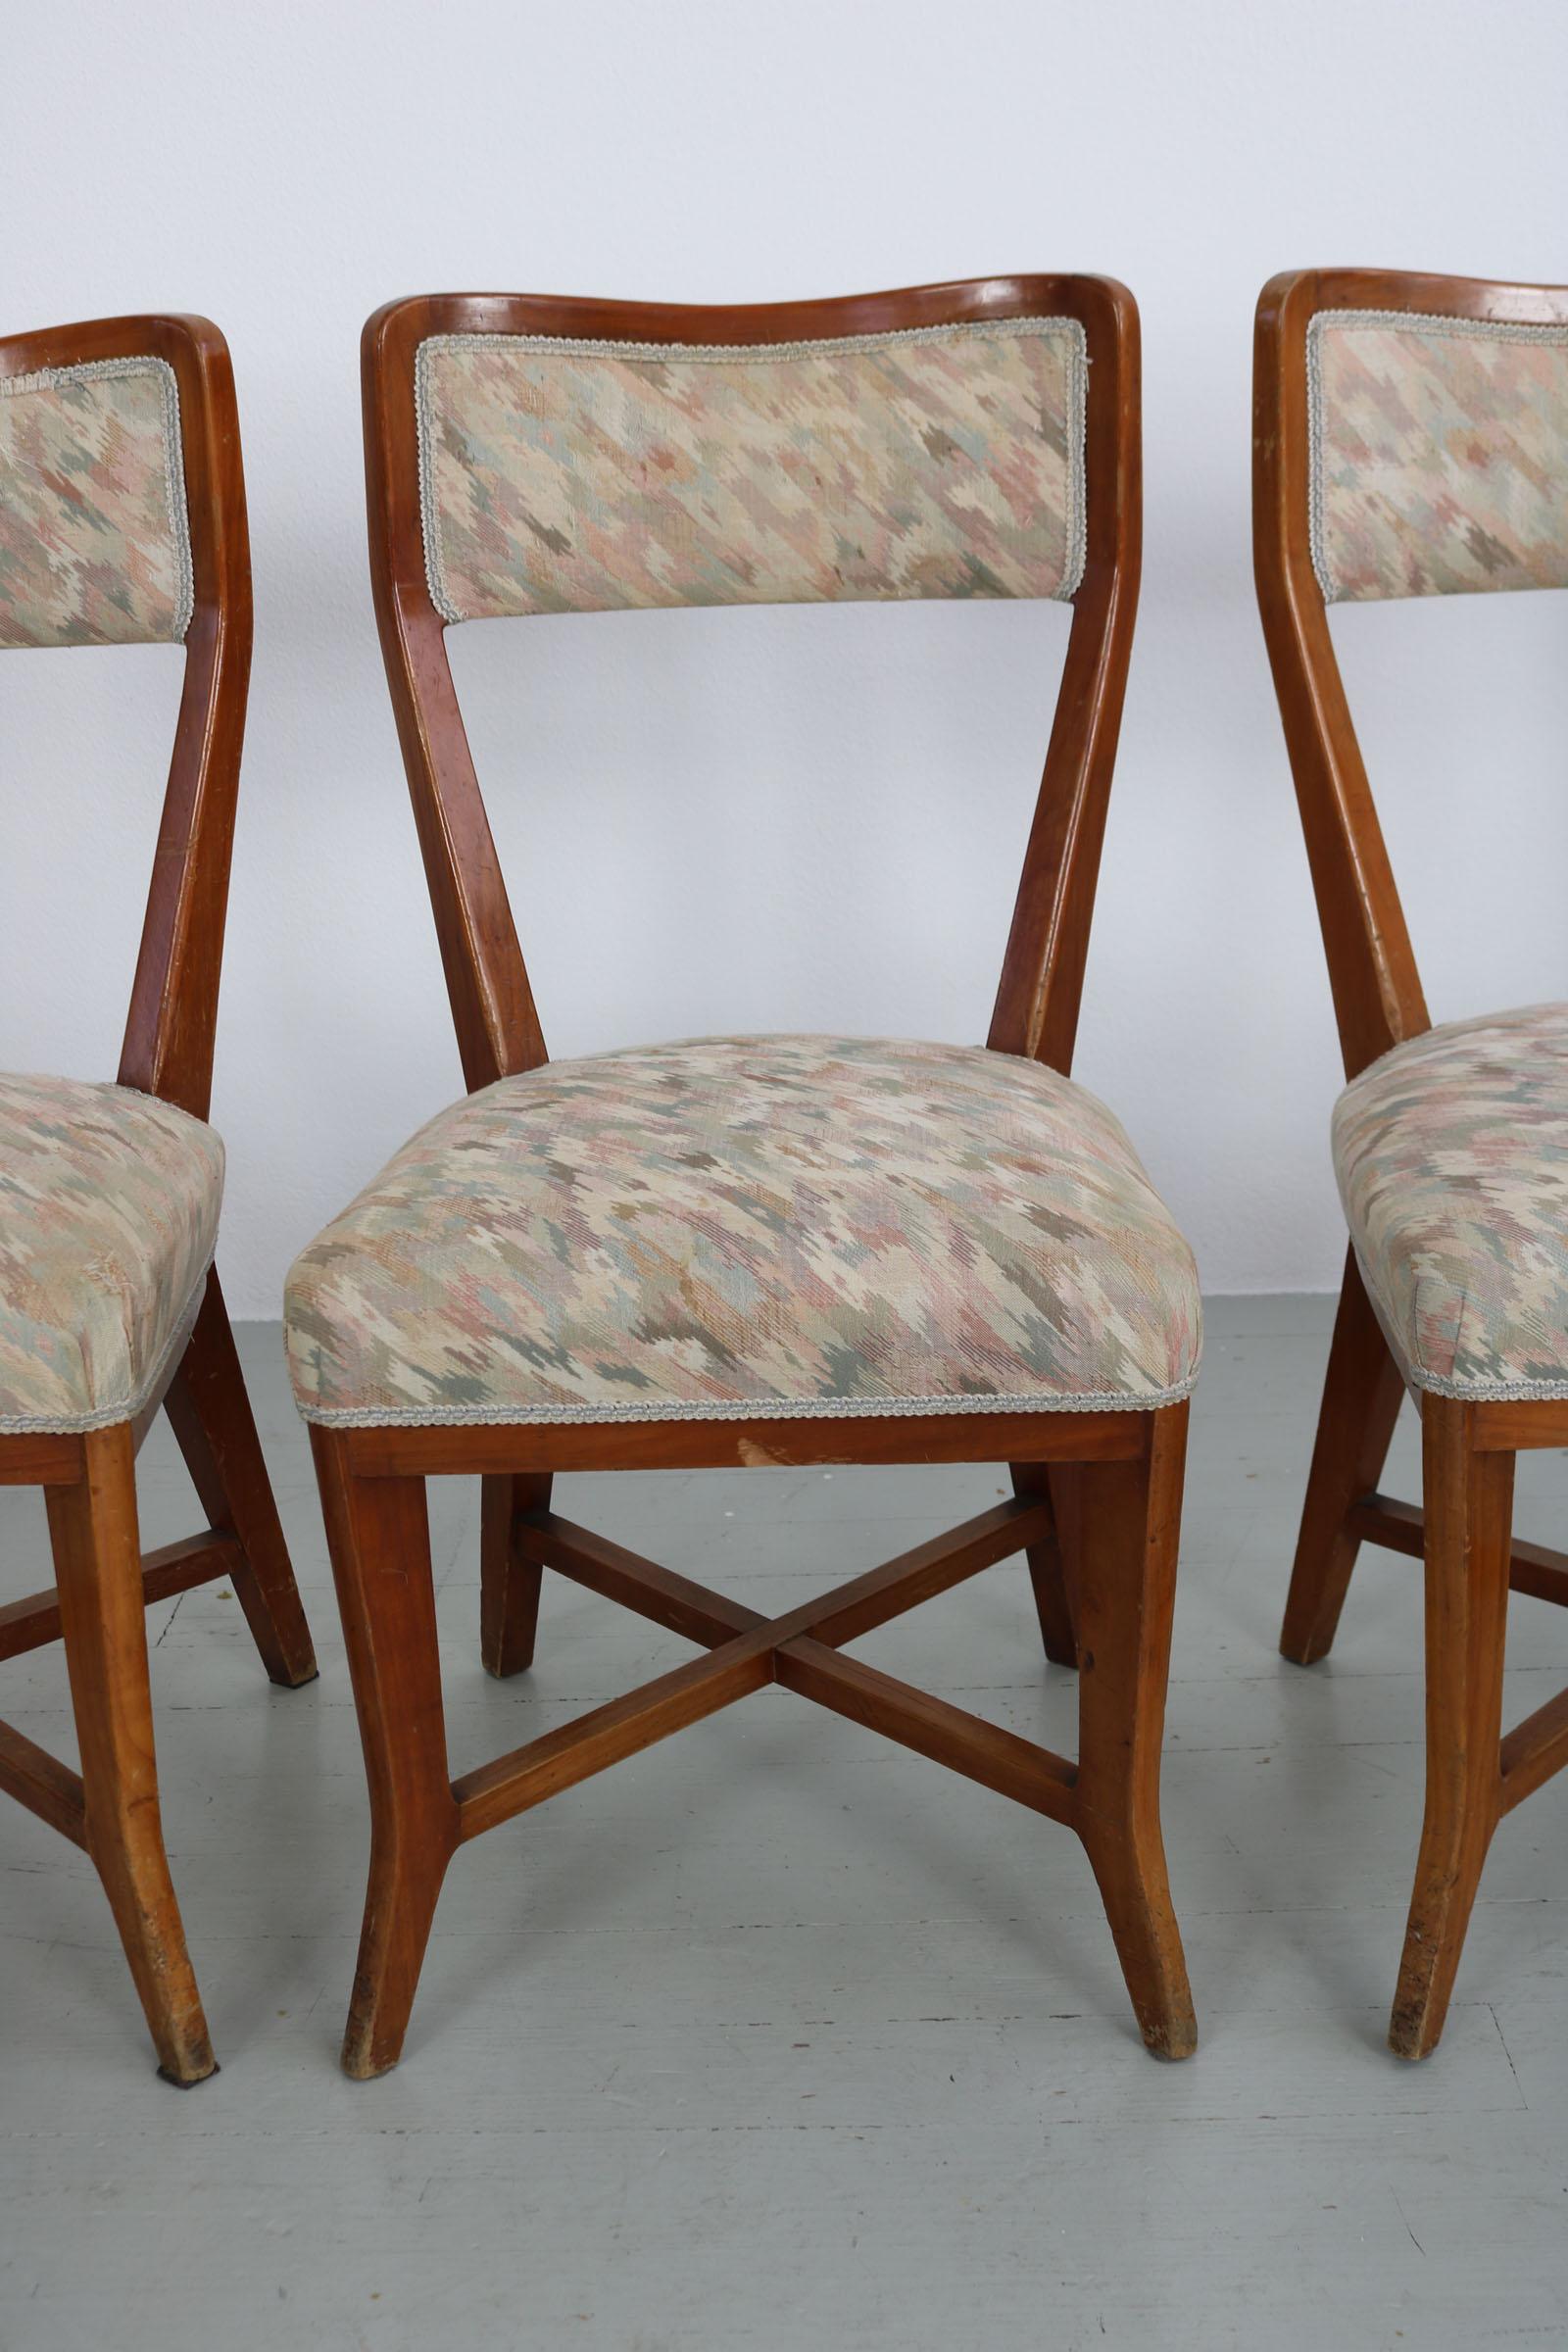 Set of 6 Melchiorre Bega Chairs Made of Cherrywood, Italy, 1950s For Sale 11